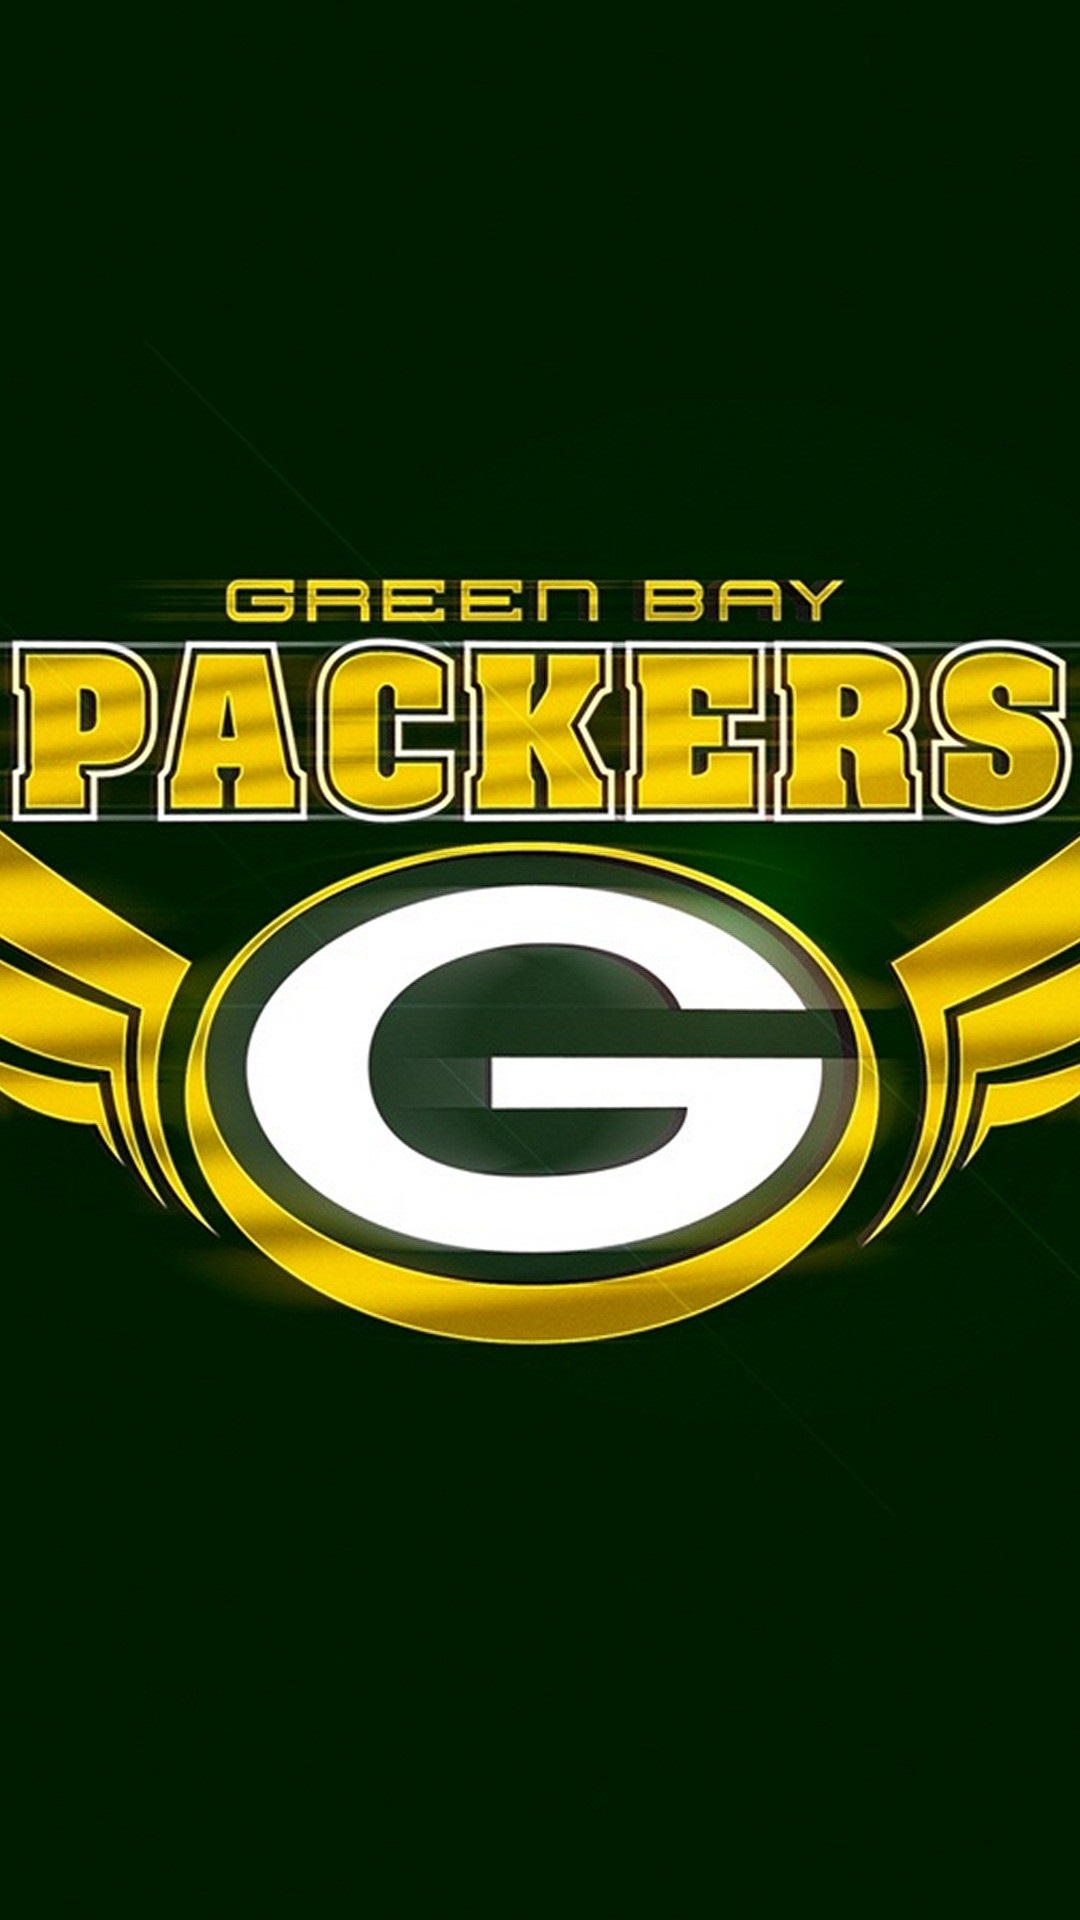 Green Bay Packers NFL iPhone Screensaver With high-resolution 1080X1920 pixel. Donwload and set as wallpaper for your iPhone X, iPhone XS home screen backgrounds, XS Max, XR, iPhone8 lock screen wallpaper, iPhone 7, 6, SE, and other mobile devices